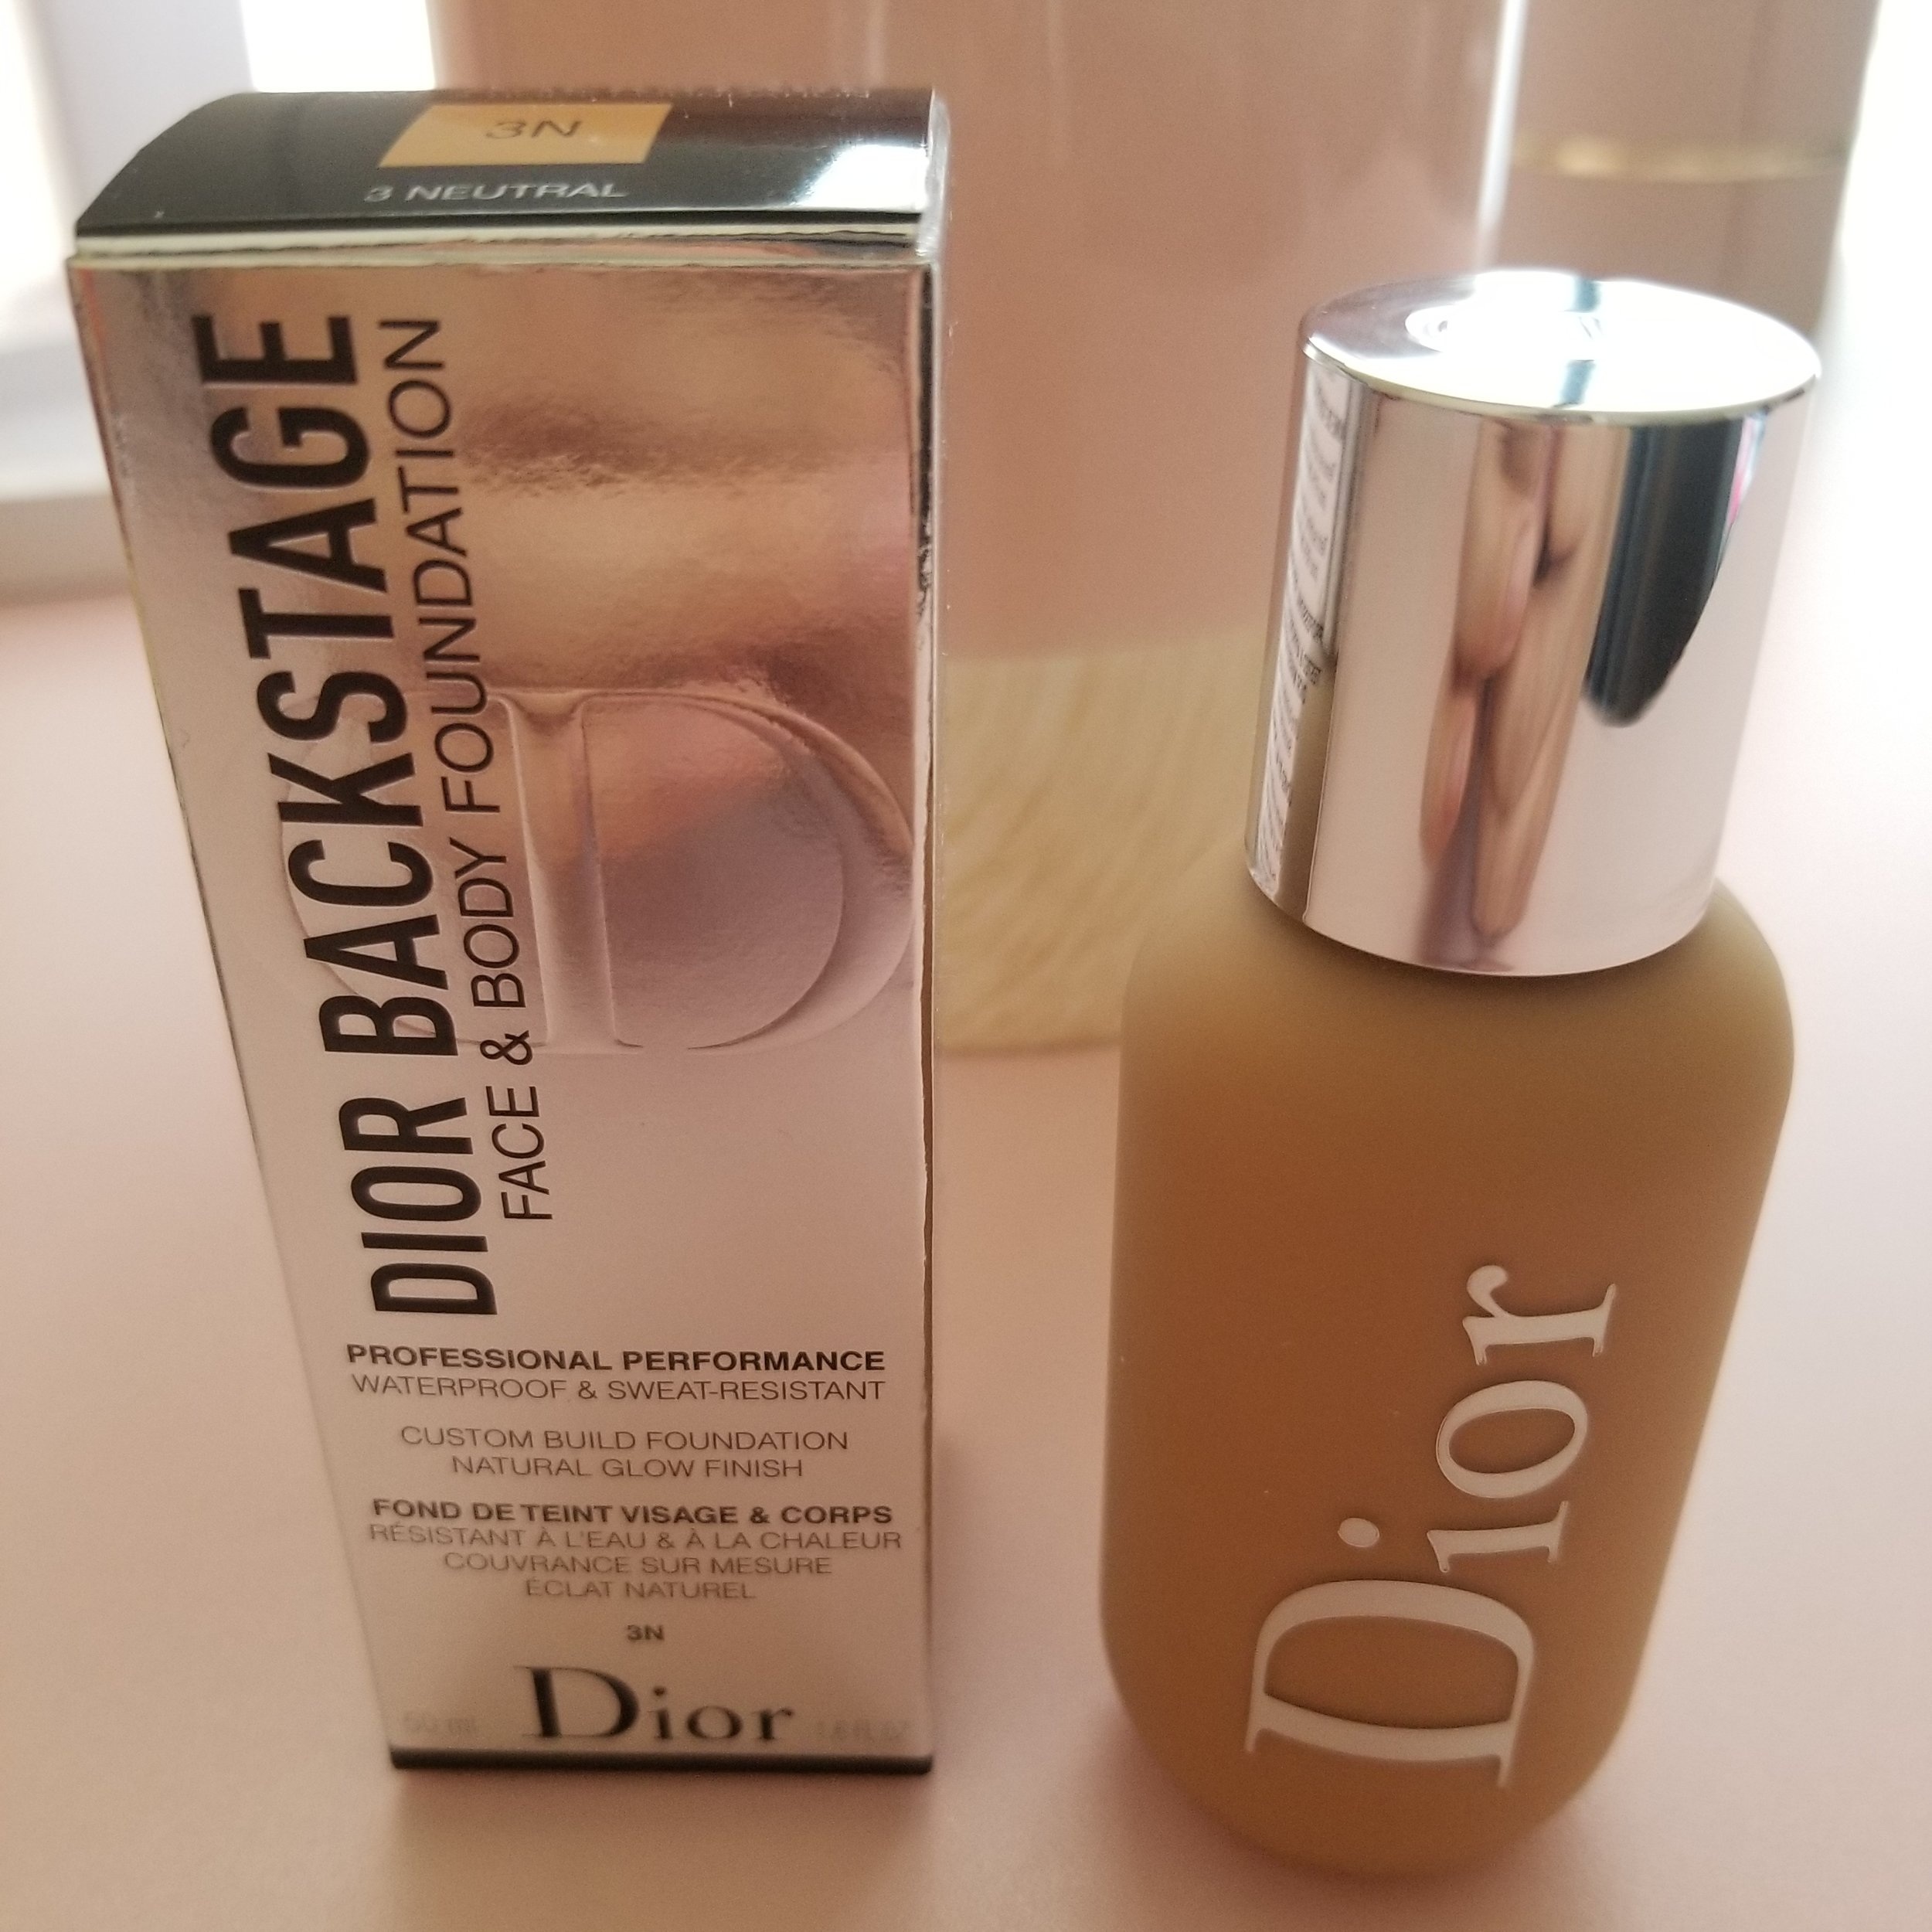 review dior face and body foundation